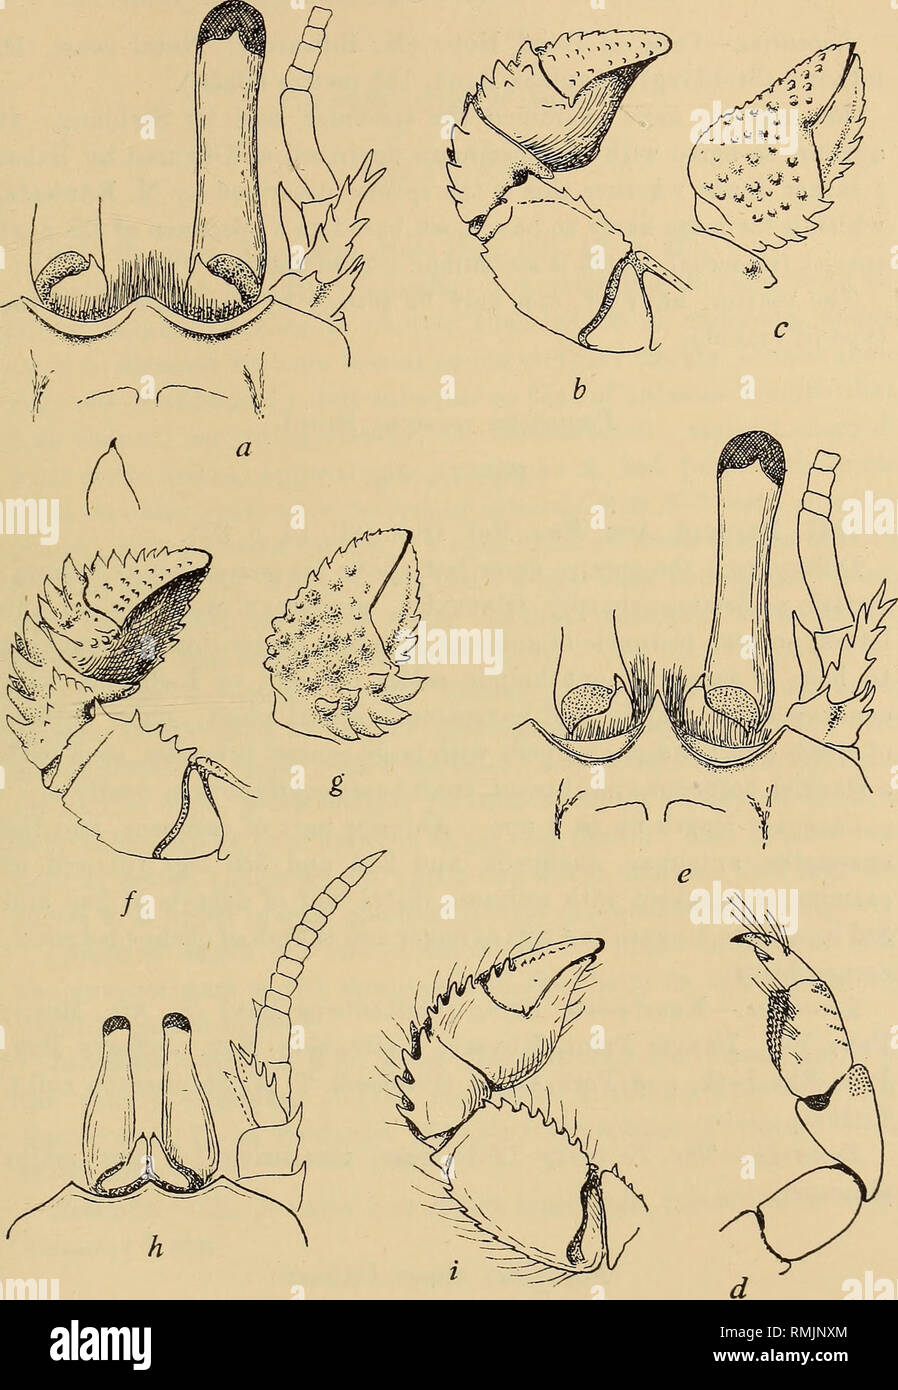 . Annals of the South African Museum = Annale van die Suid-Afrikaanse Museum. Natural history. Fig. 78.—Paguristes gamianus (M. Edw.). a, front of carapace, with ocular scales, right eye, and ant. 2 (setae on latter omitted), b, inner view of left cheliped (denuded), c, outer view of left chela, d, outer view of left 4th leg, marginal plumose setae omitted. Paguristes rosaceus Brnrd. e, front of carapace, with ocular scales, right eye, and ant. 2 (setae on latter omitted). /, inner view of left cheliped. g, outer view of left chela. Paguristes engyops Brnrd. h, front of carapace, with ocular s Stock Photo